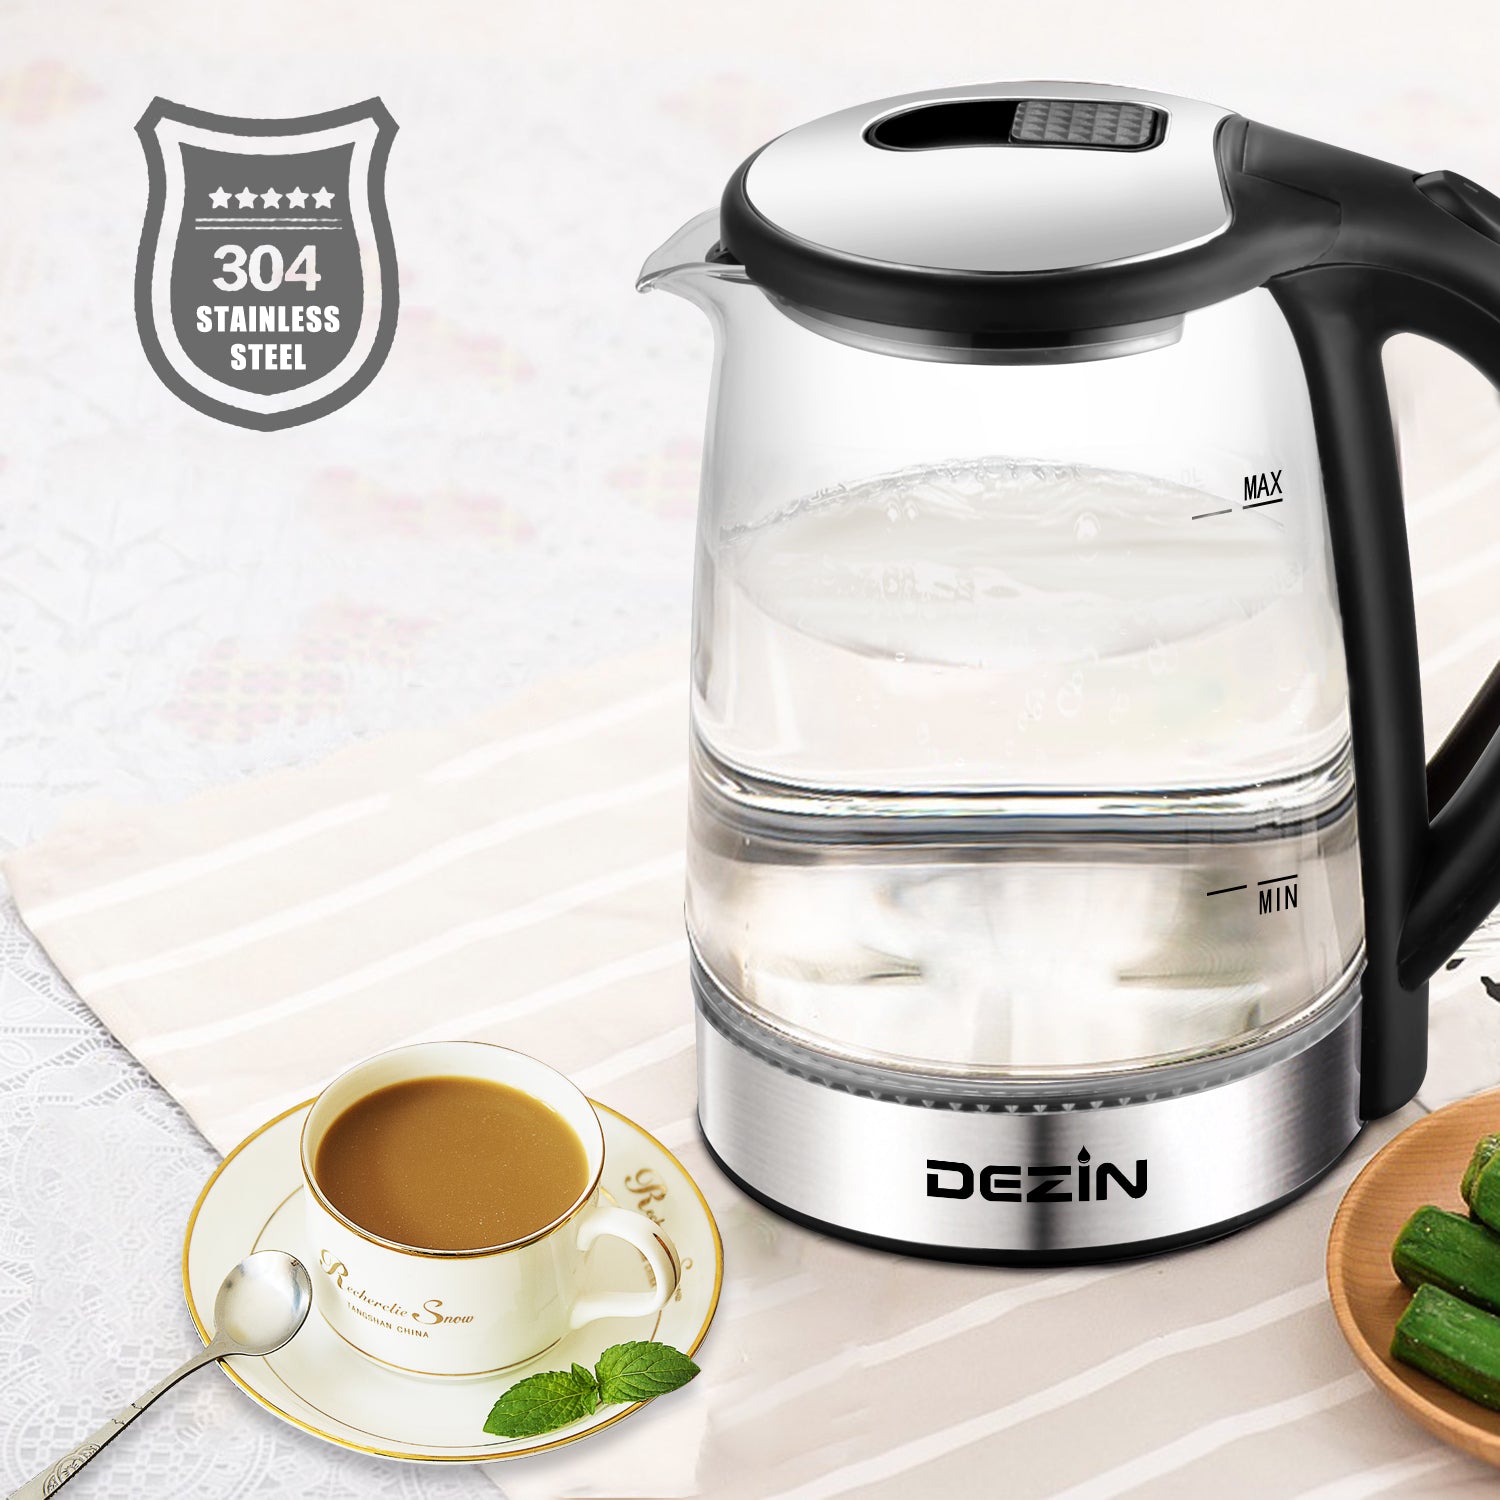 Dezin Electric Glass Kettle, 1.8L, Equipped  With Blue LED Indicator